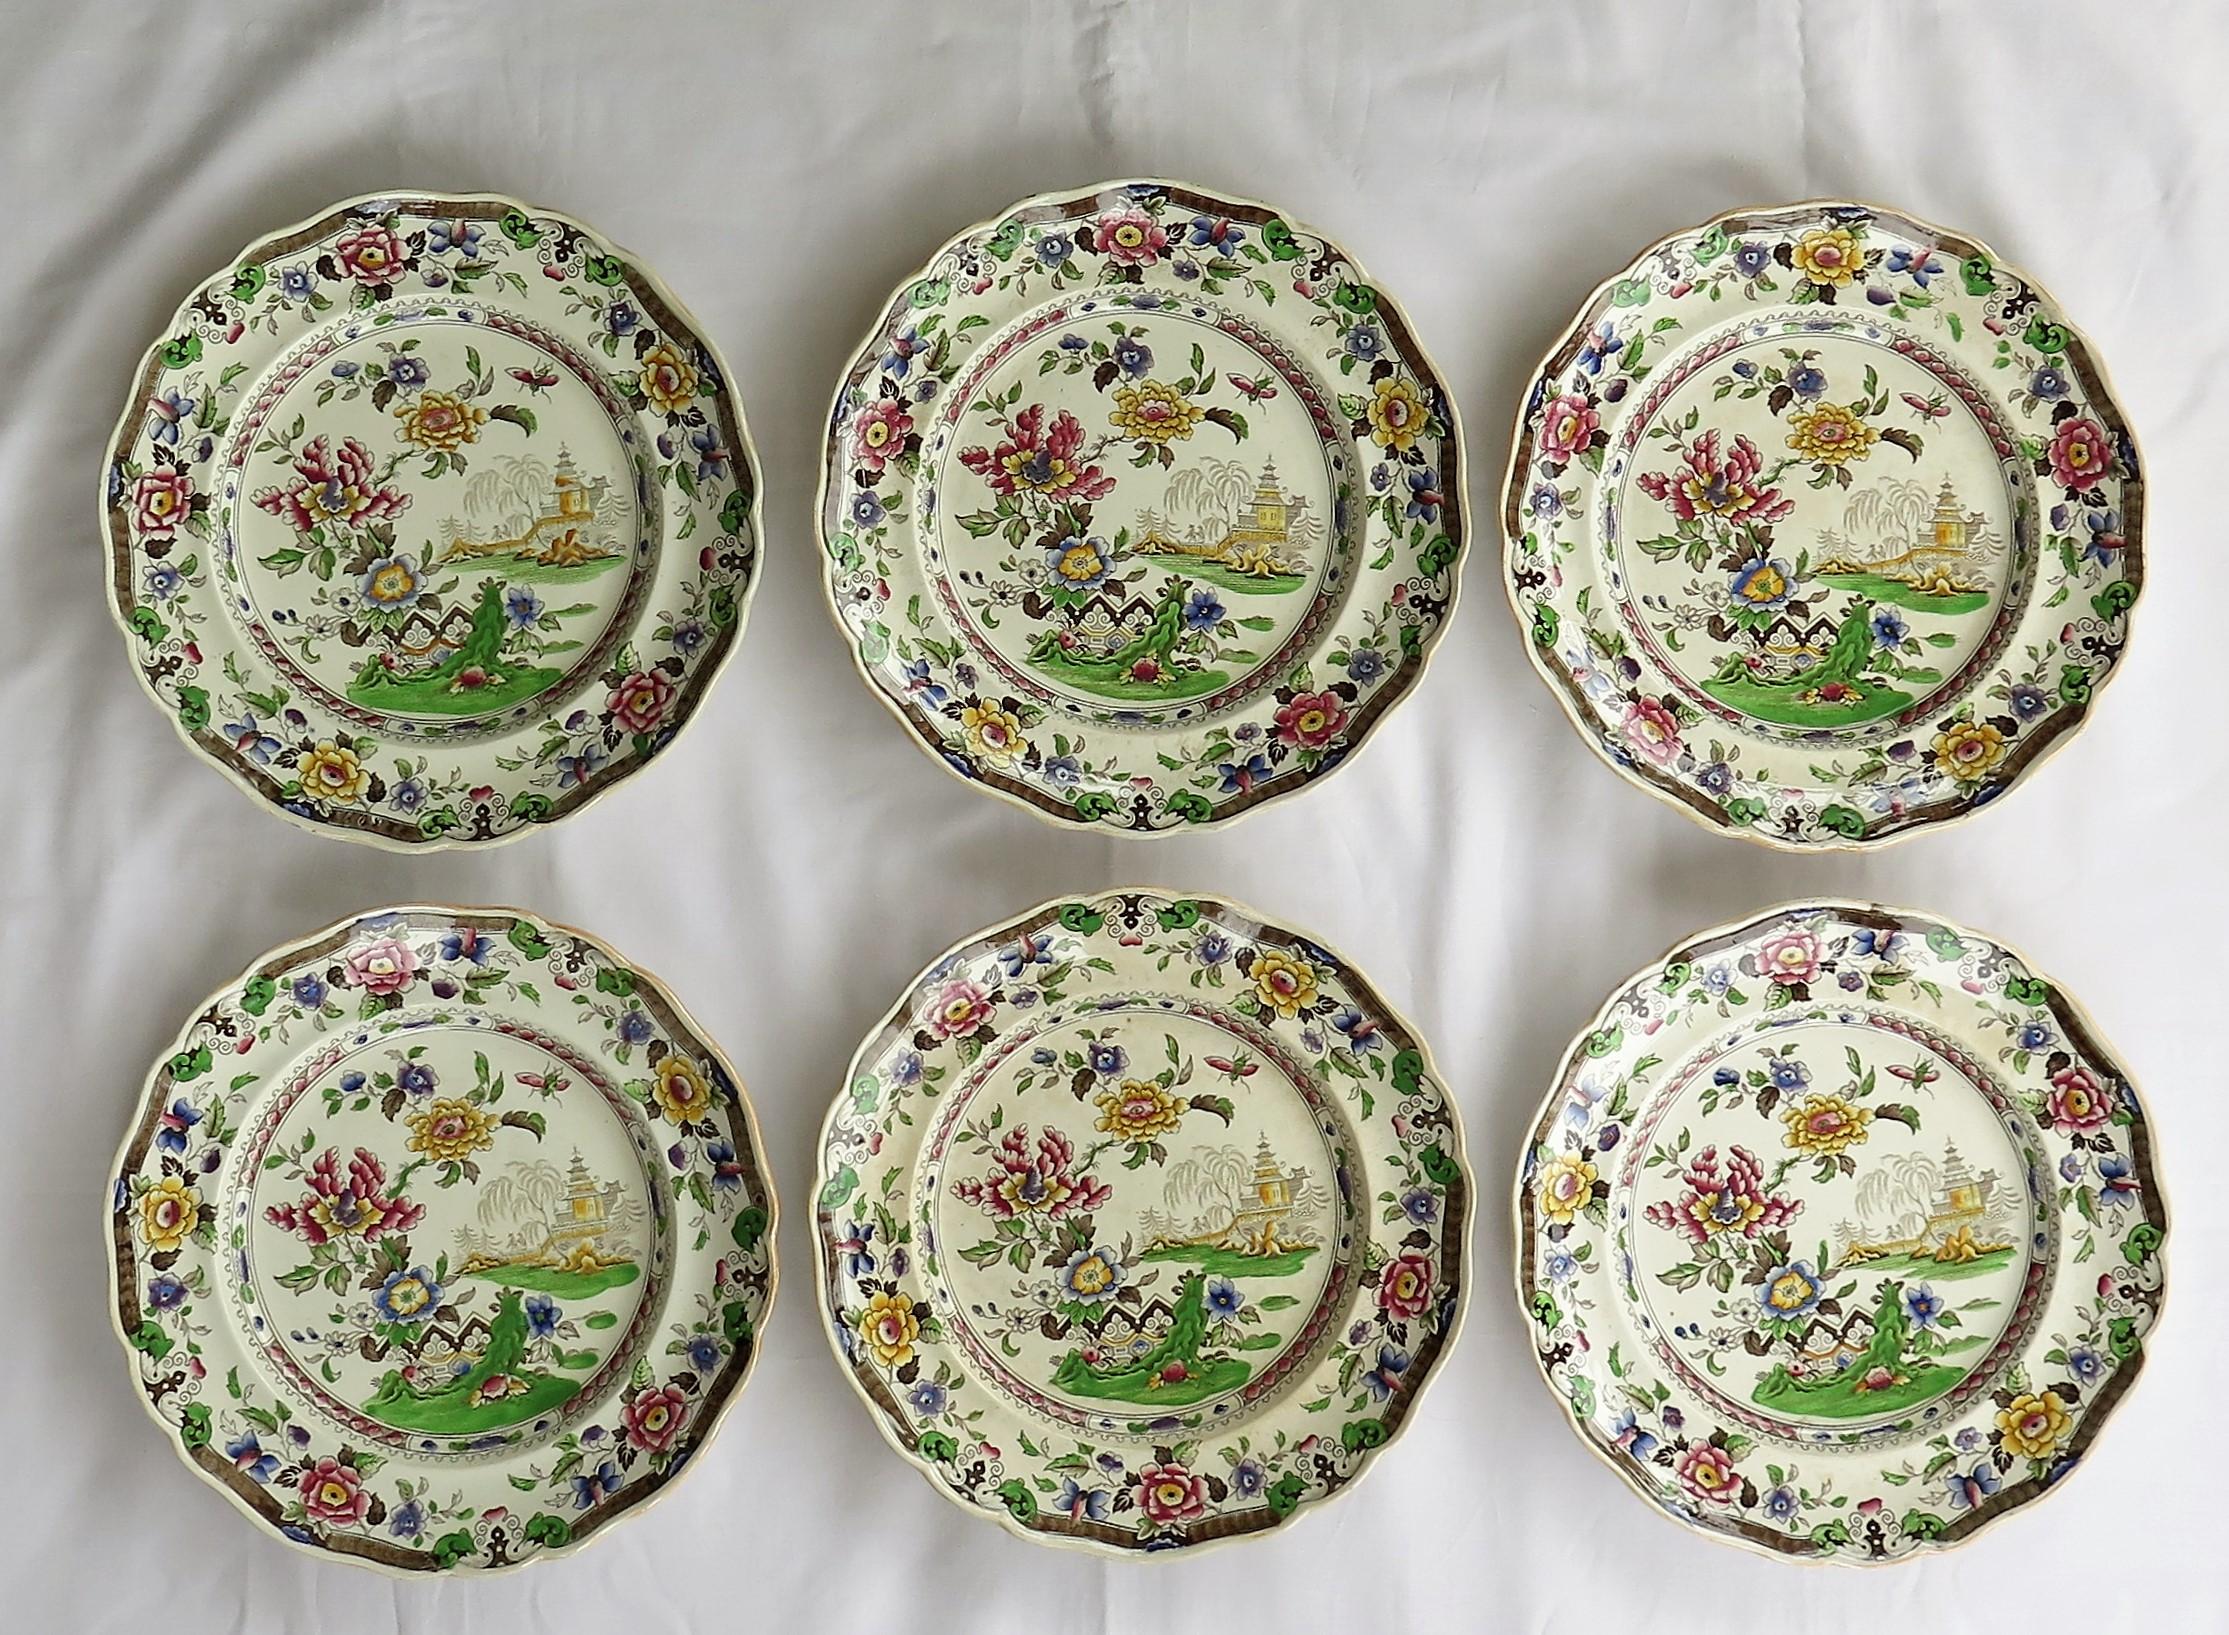 Chinoiserie SIX Large Pottery Dinner Plates by Zachariah Boyle Chinese Flora Ptn, circa 1825